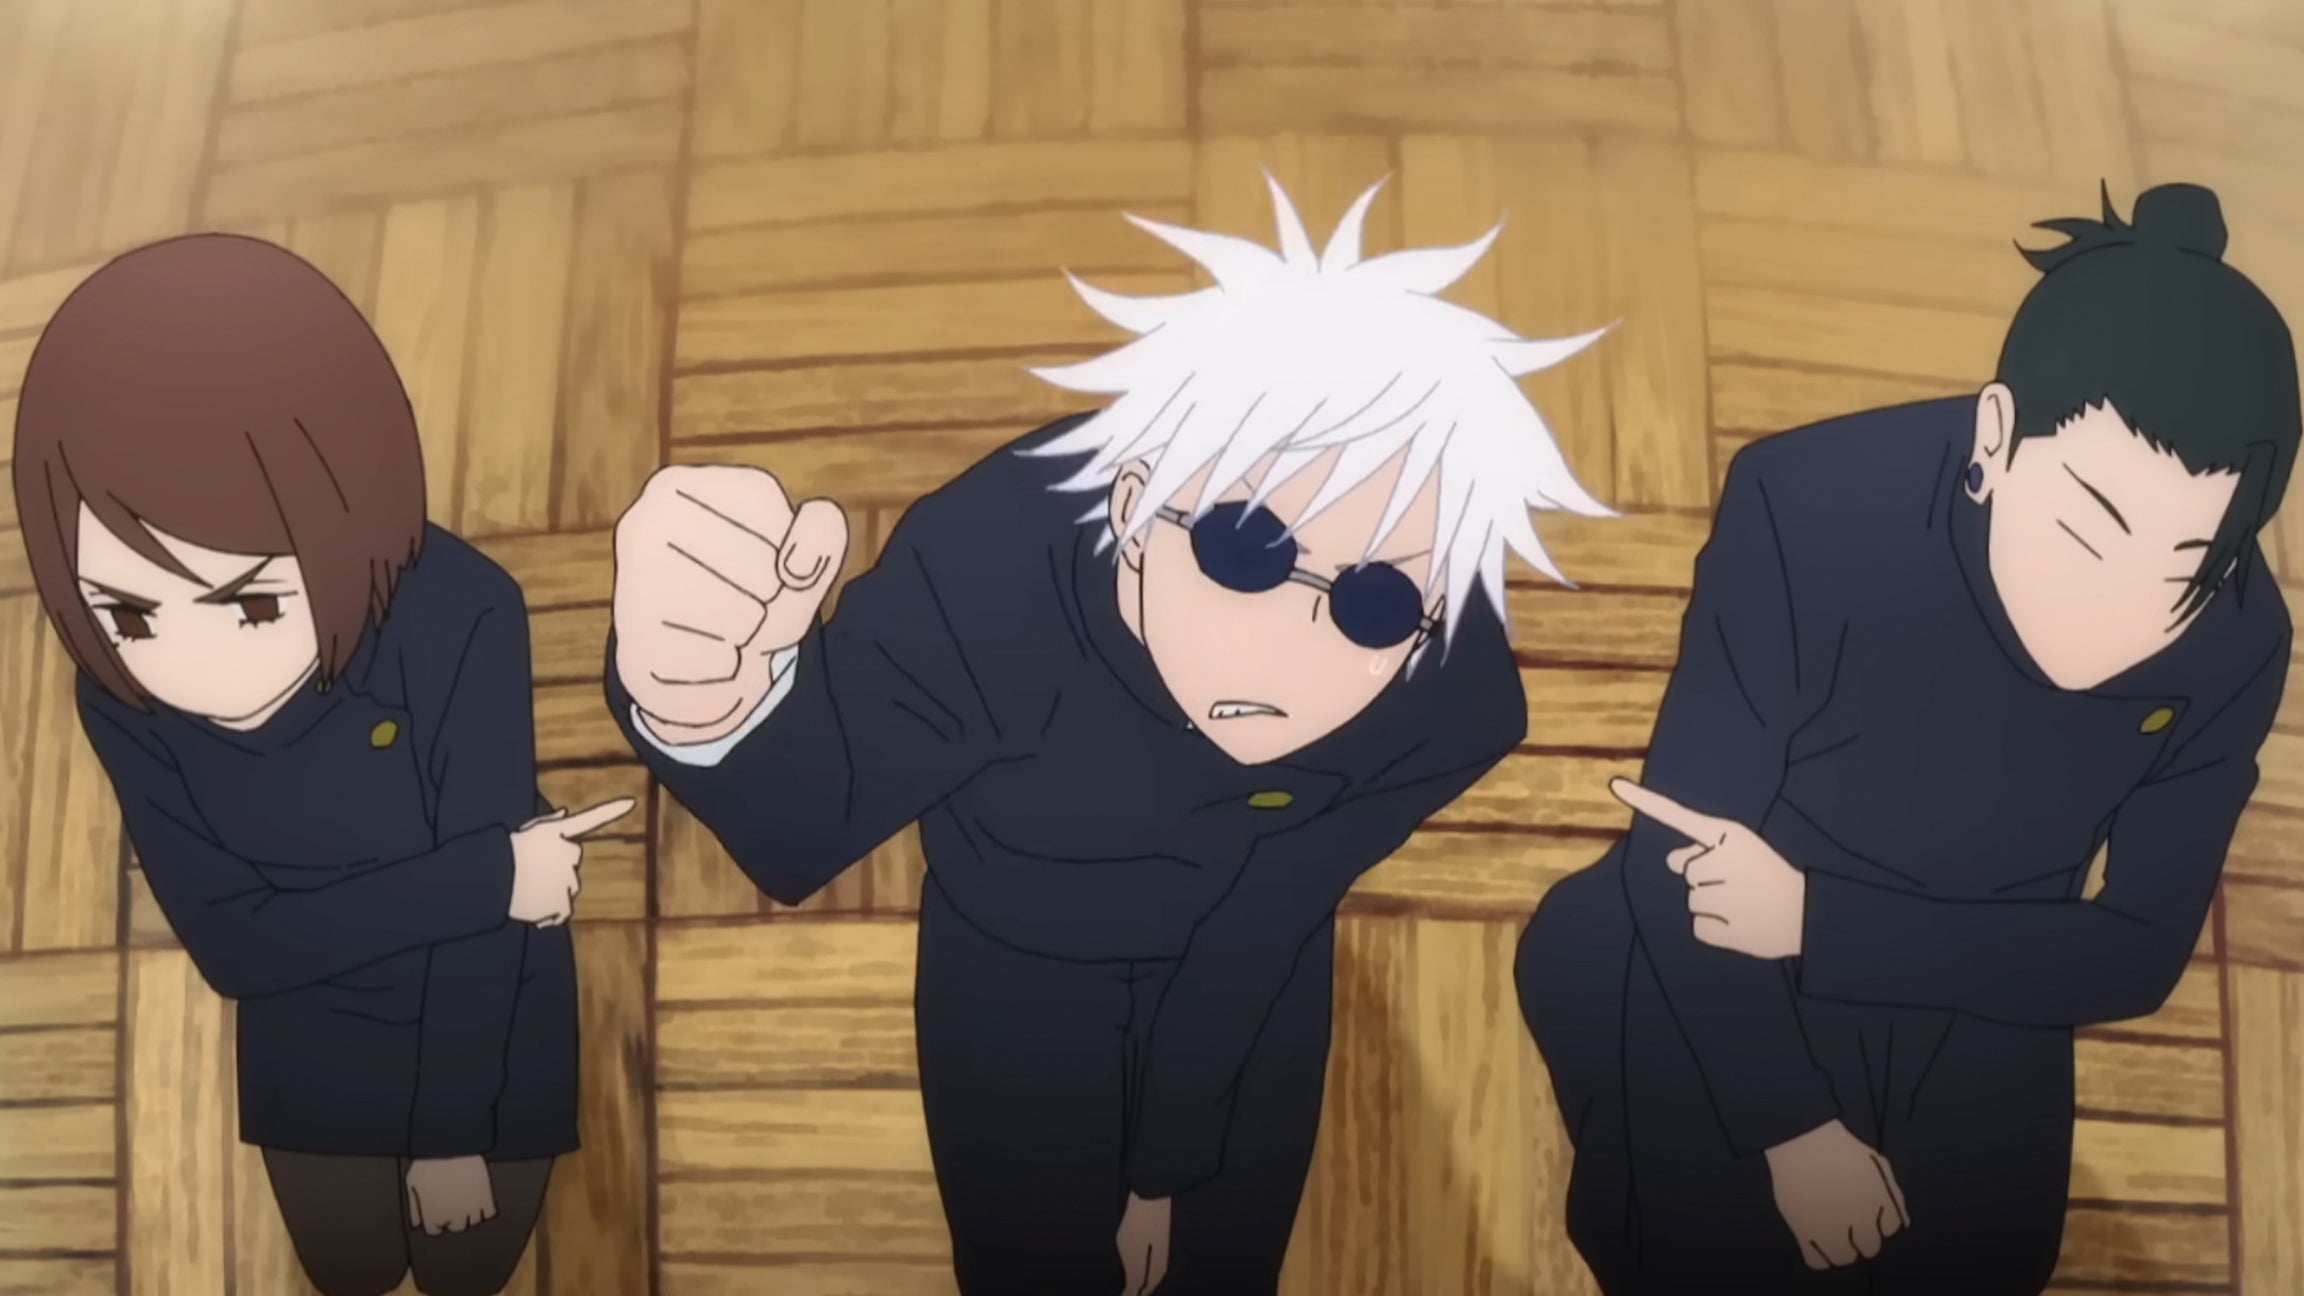 Image showing characters from the popular anime Jujutsu Kaisen posing in an episode of season 2.